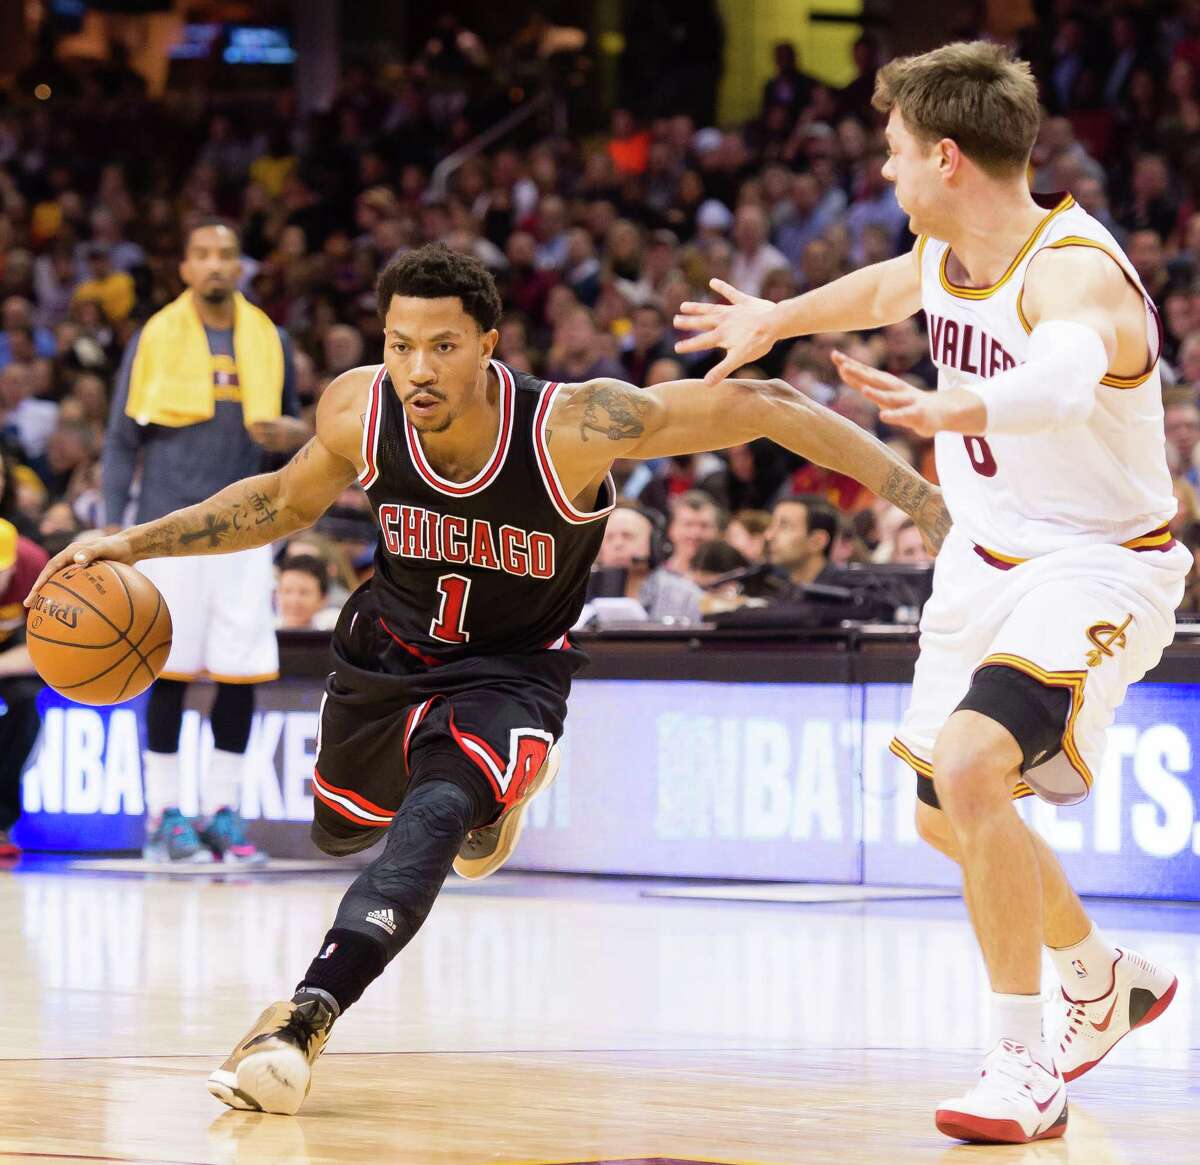 ESPN Stats & Info on X: At 30 years and 27 days old, Derrick Rose